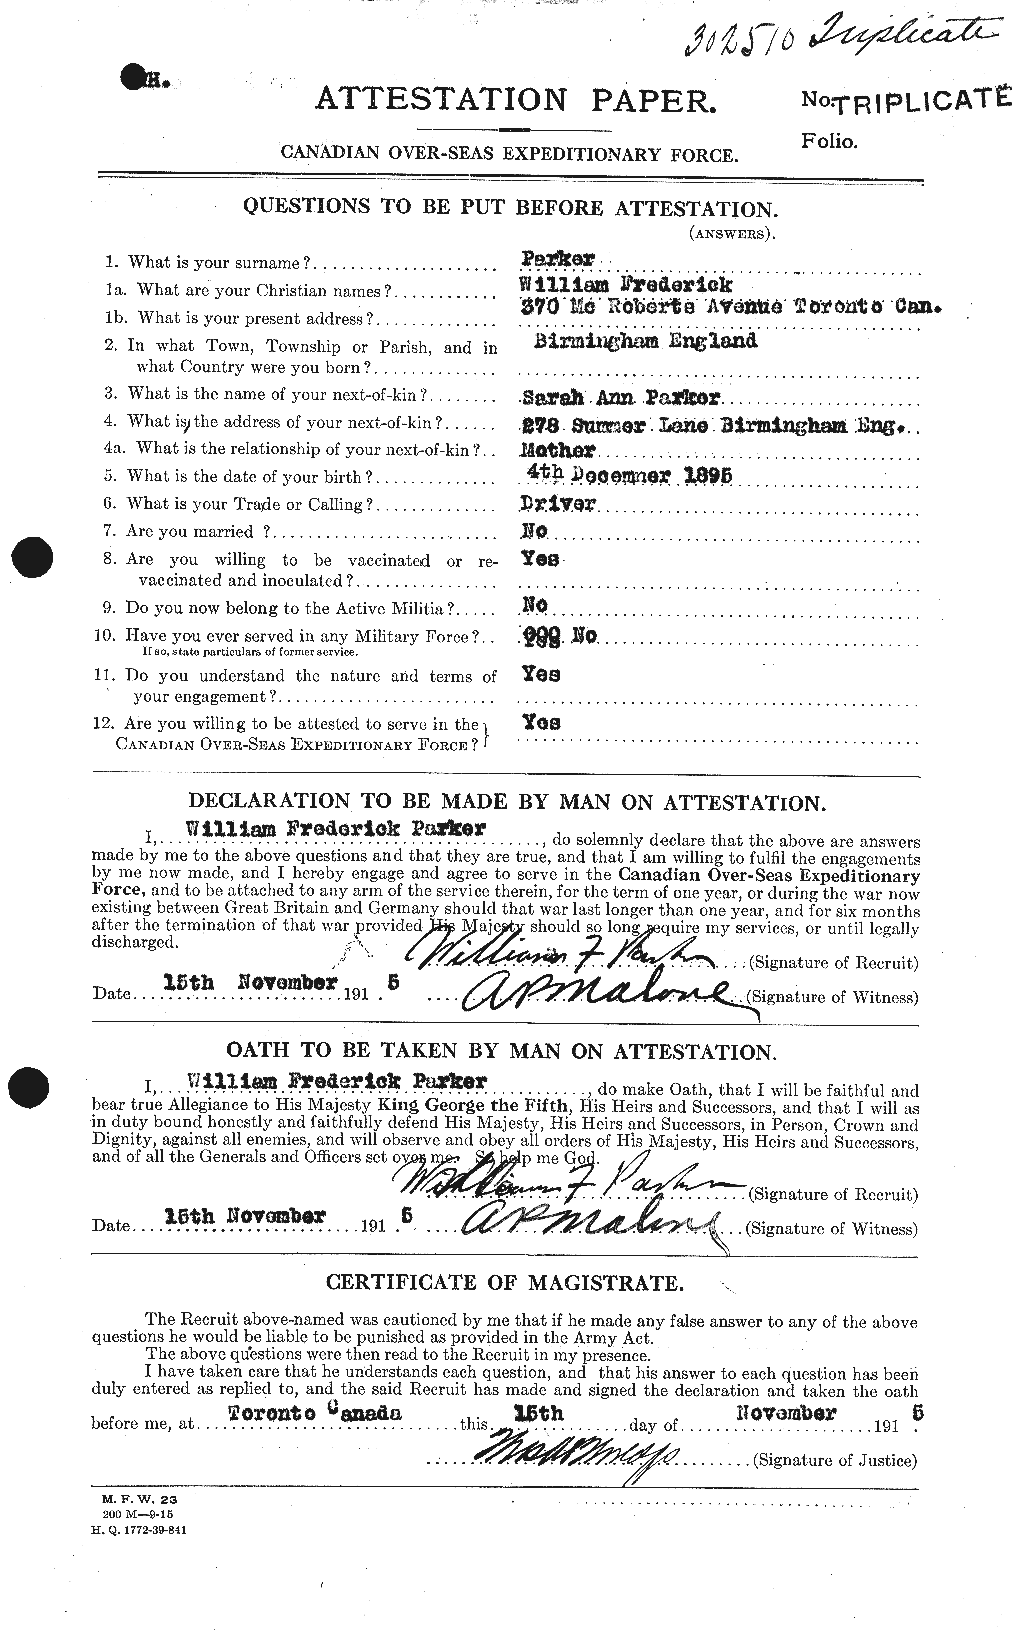 Personnel Records of the First World War - CEF 565742a